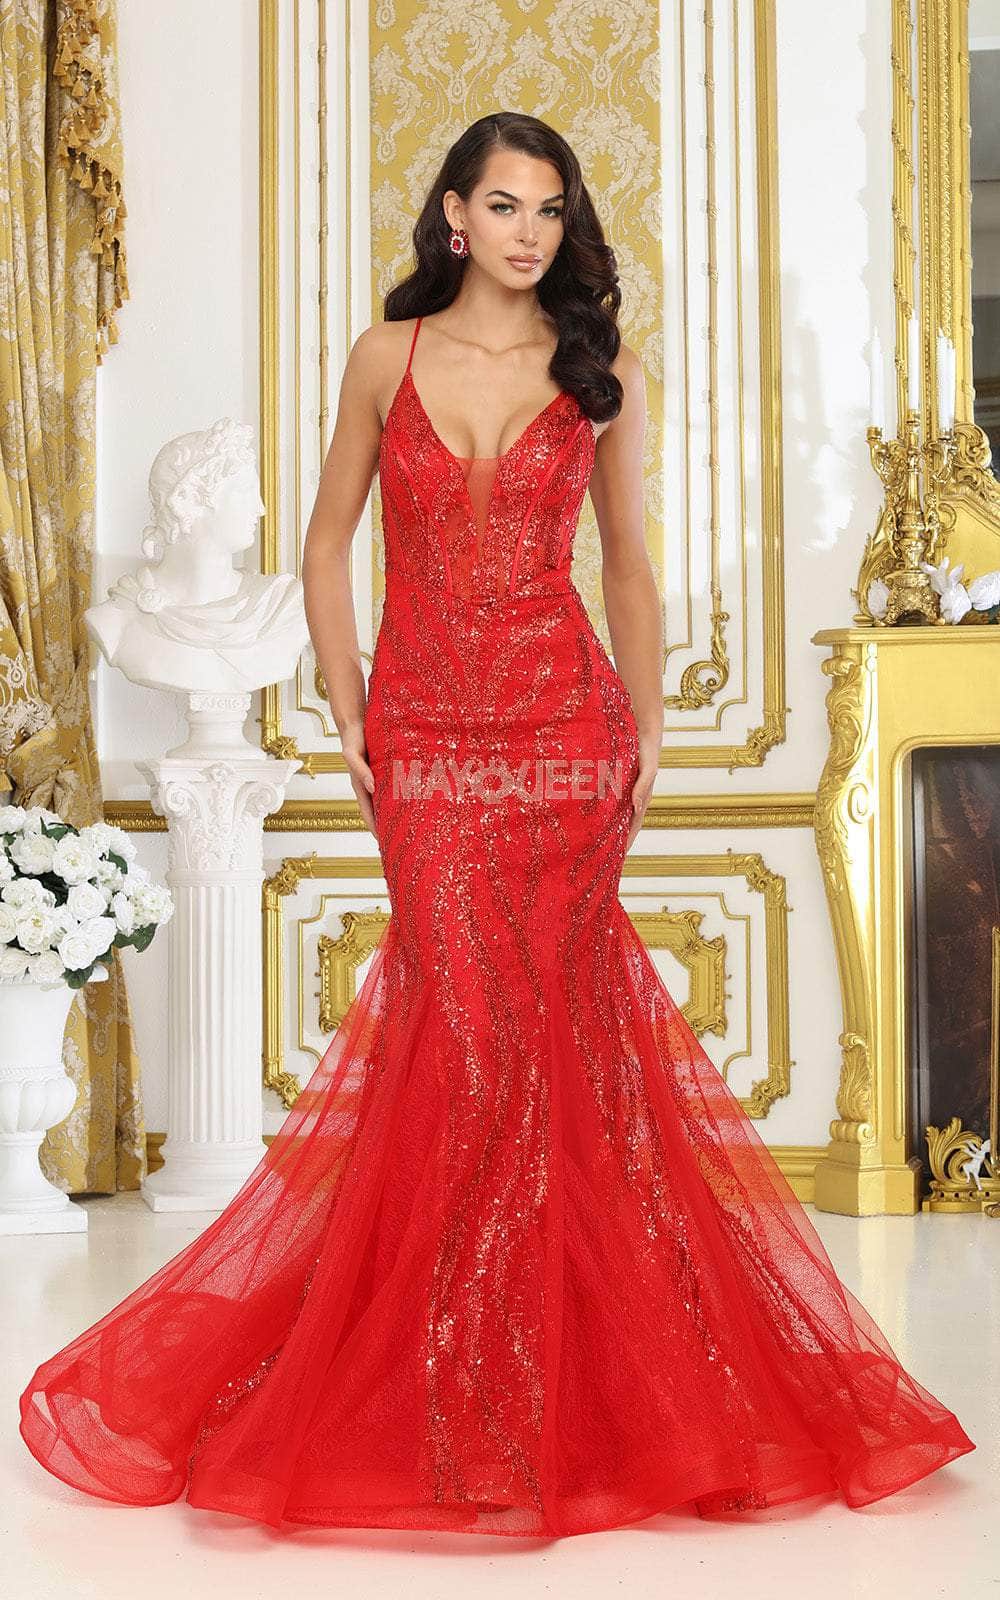 May Queen RQ8078 - Sequin Embellished Crisscross Back Prom Gown